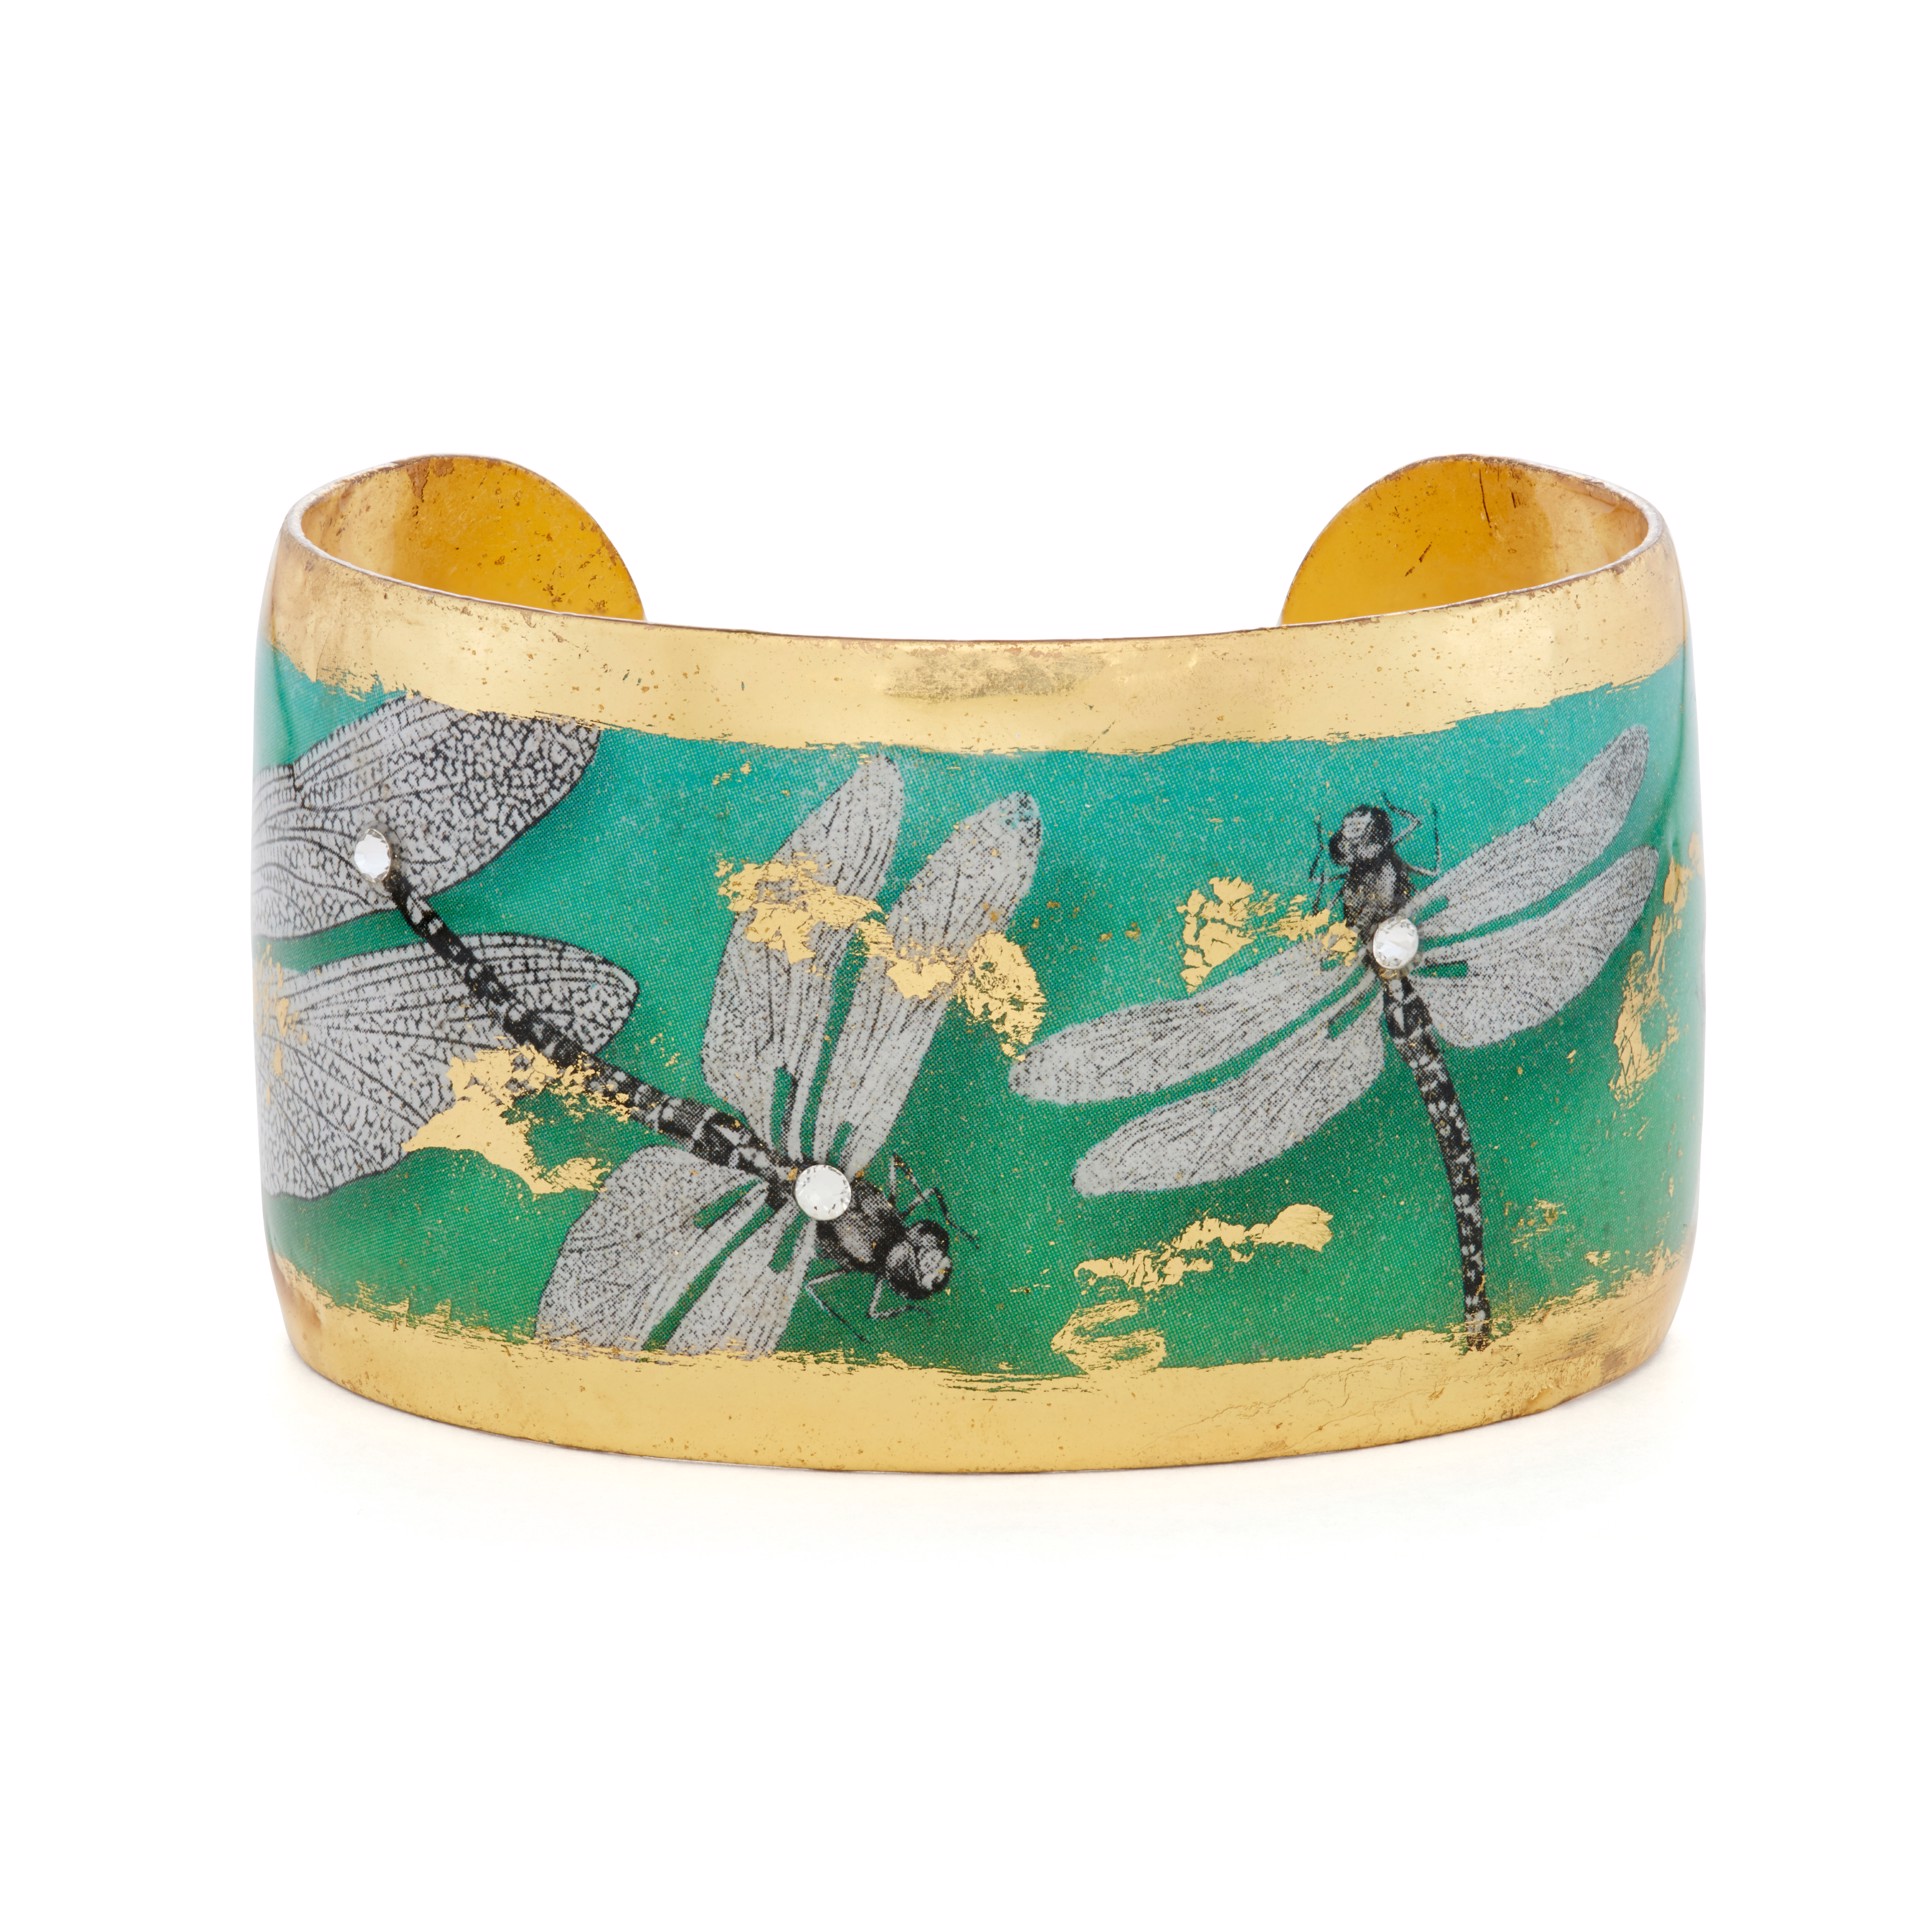 Dragonfly Cuff, Blue Green, 1.5" Gold by Evocateur